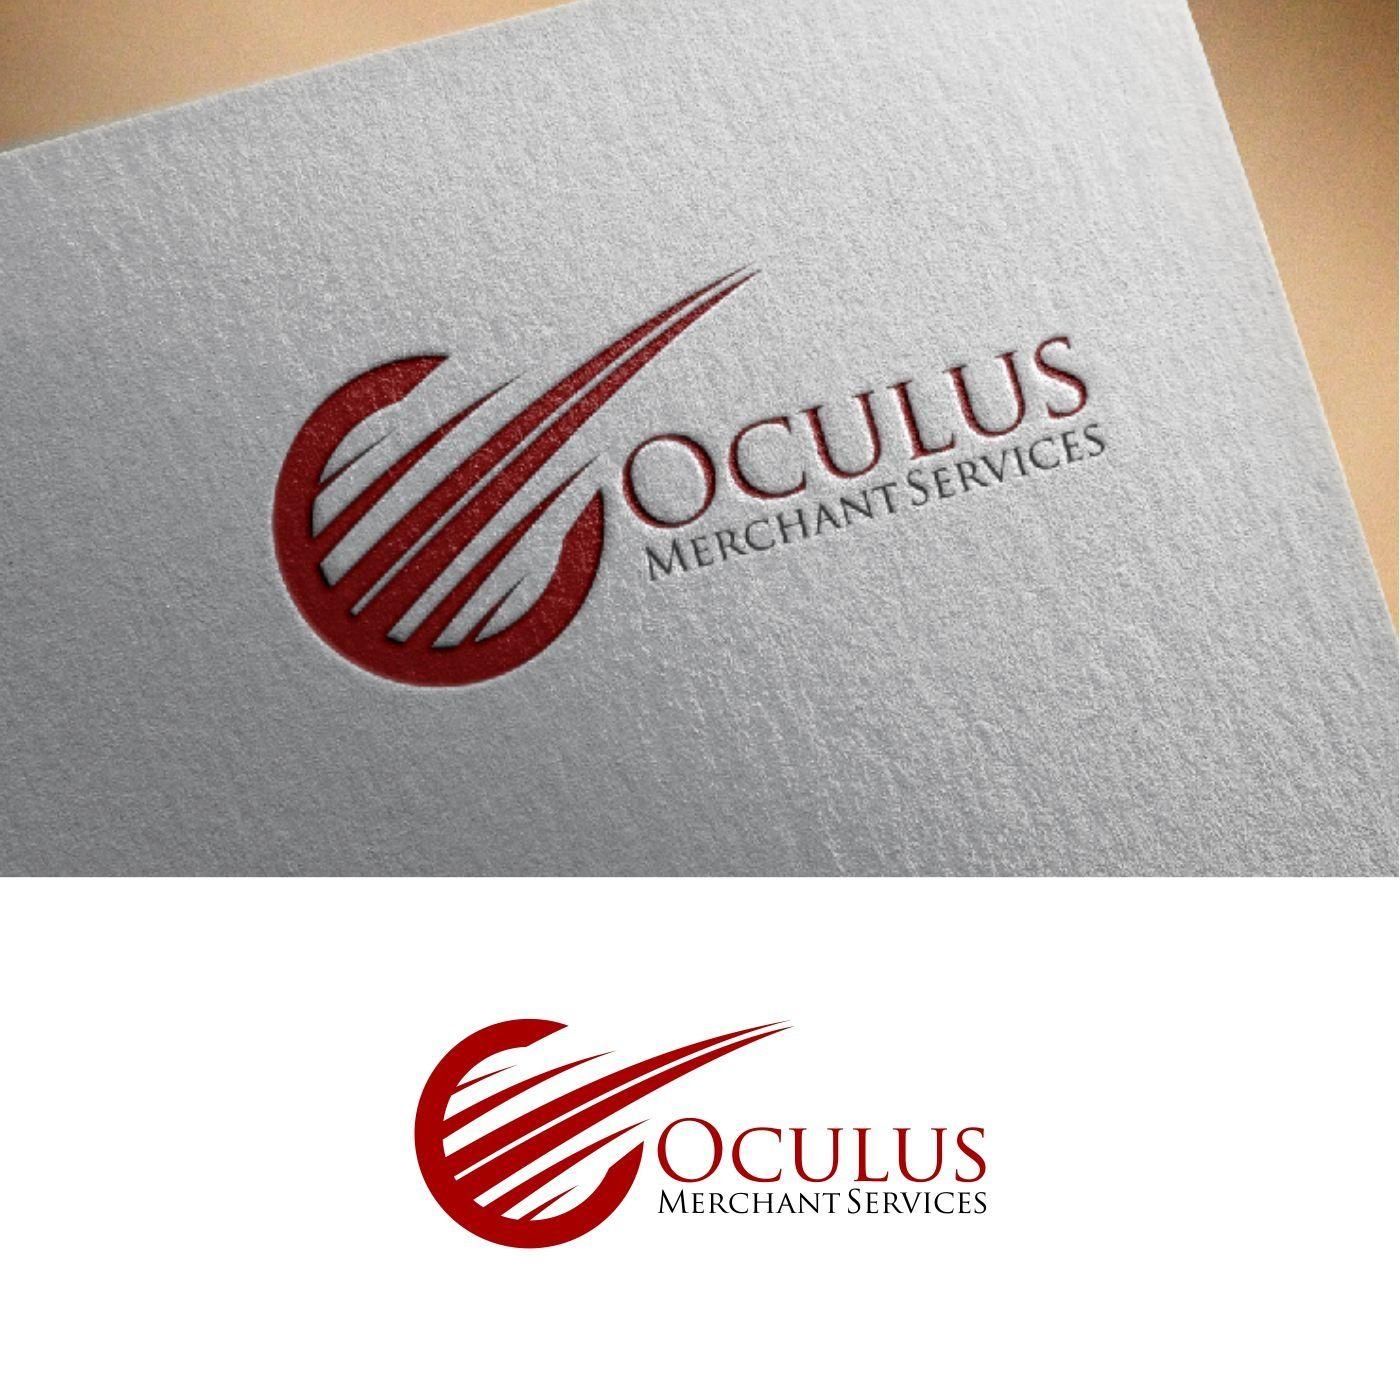 Generic Corporate Logo - It's even scary - Generic and overused logo designs sold - OCULUS ...